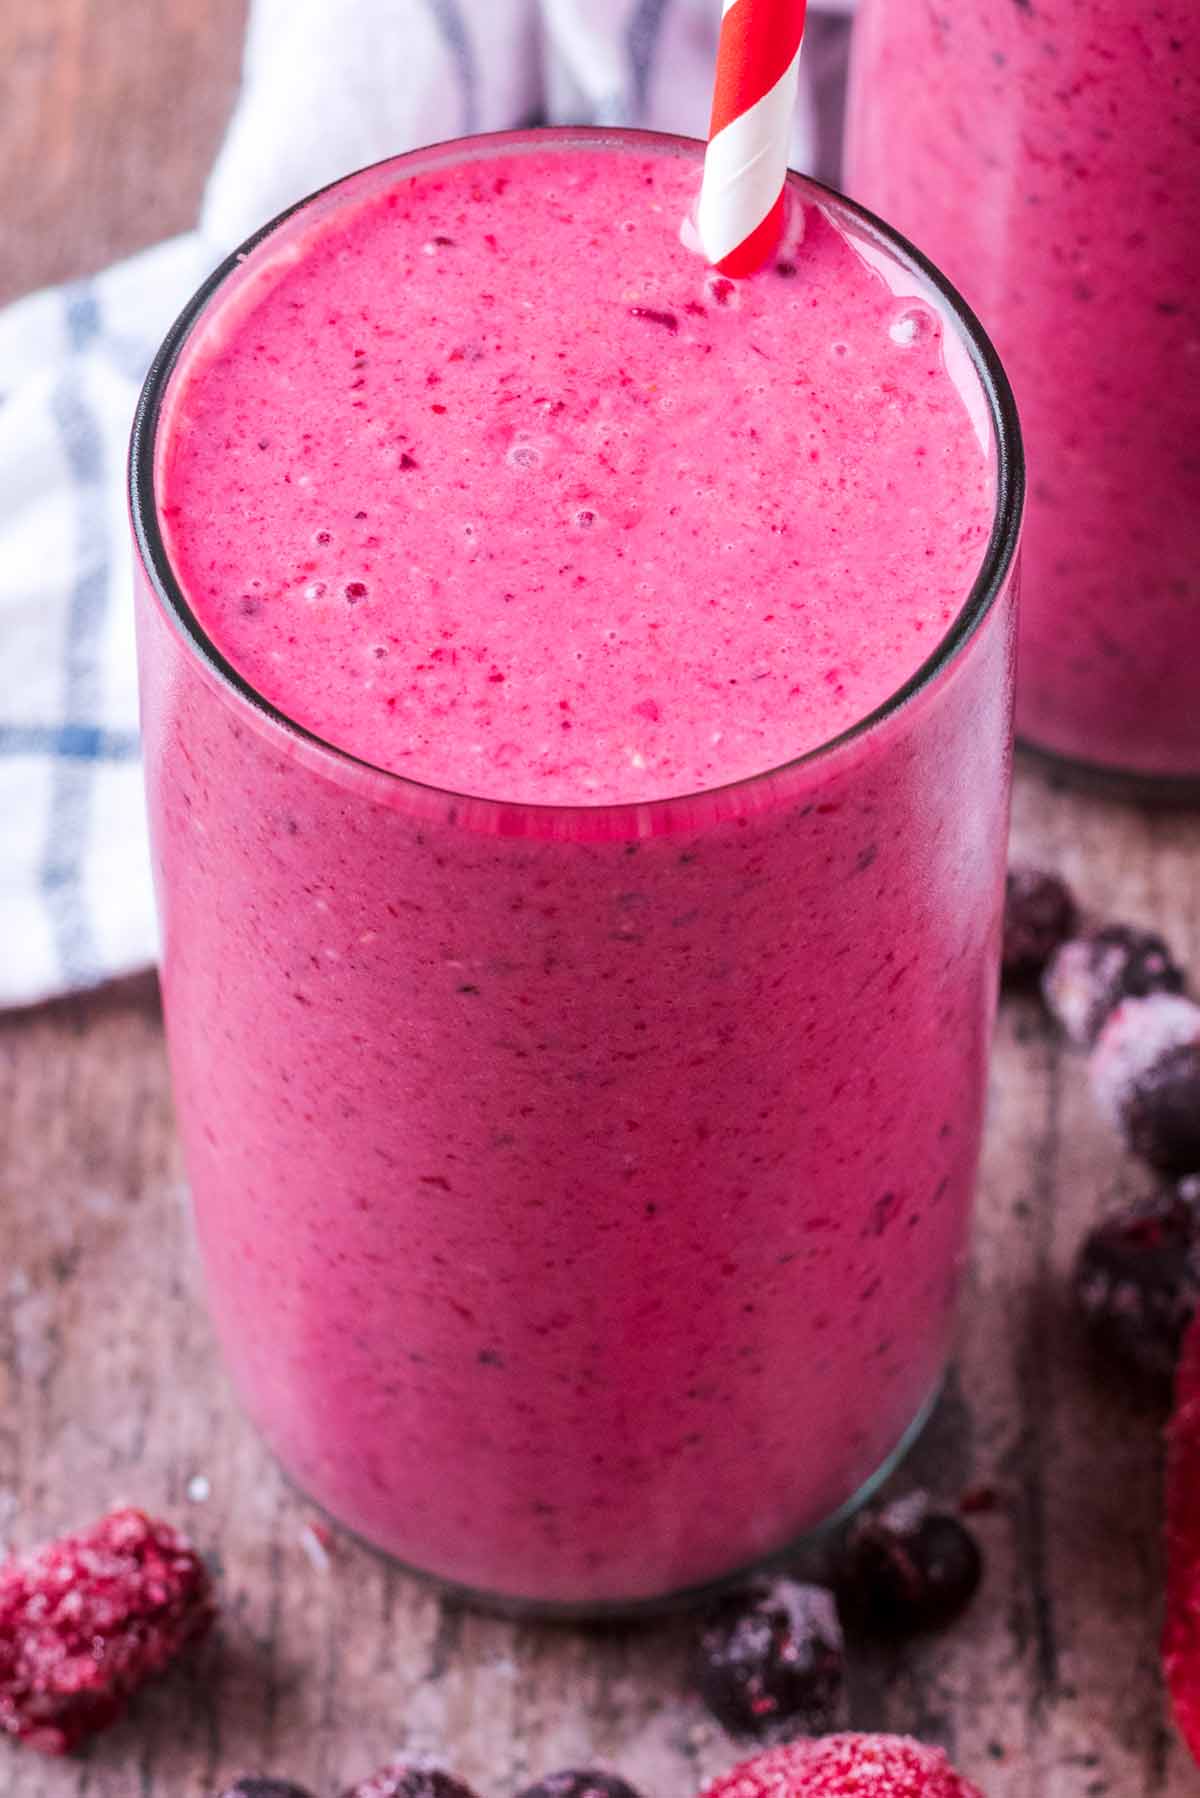 A pink fruit smoothie with a red and white striped drinking straw.